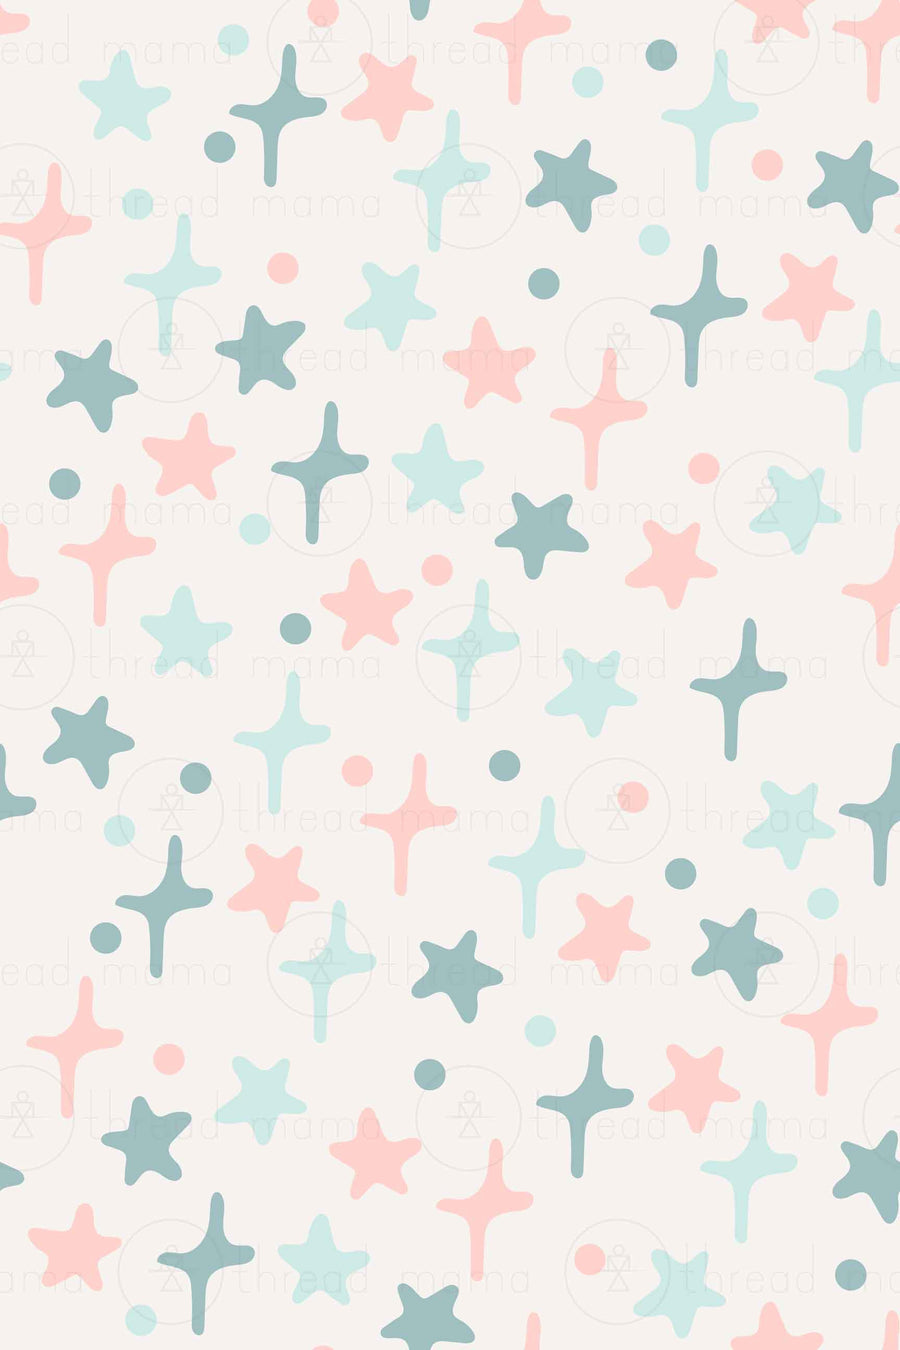 Background Pattern #58 (Printable Poster)